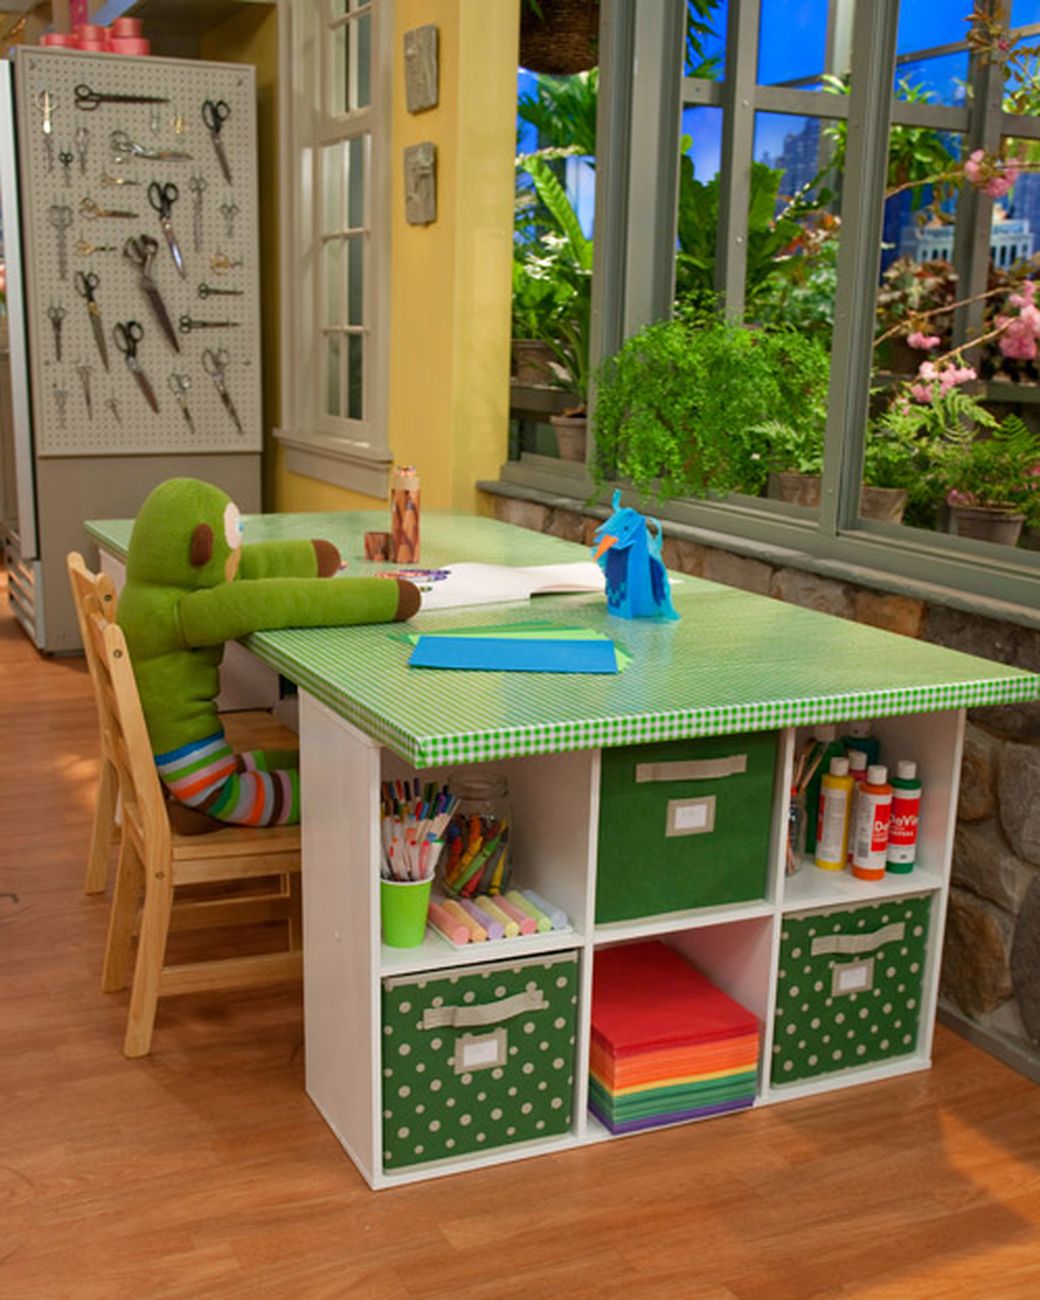 25+ Creative DIY Projects to Make a Craft Table --> Colorful Crafting Table